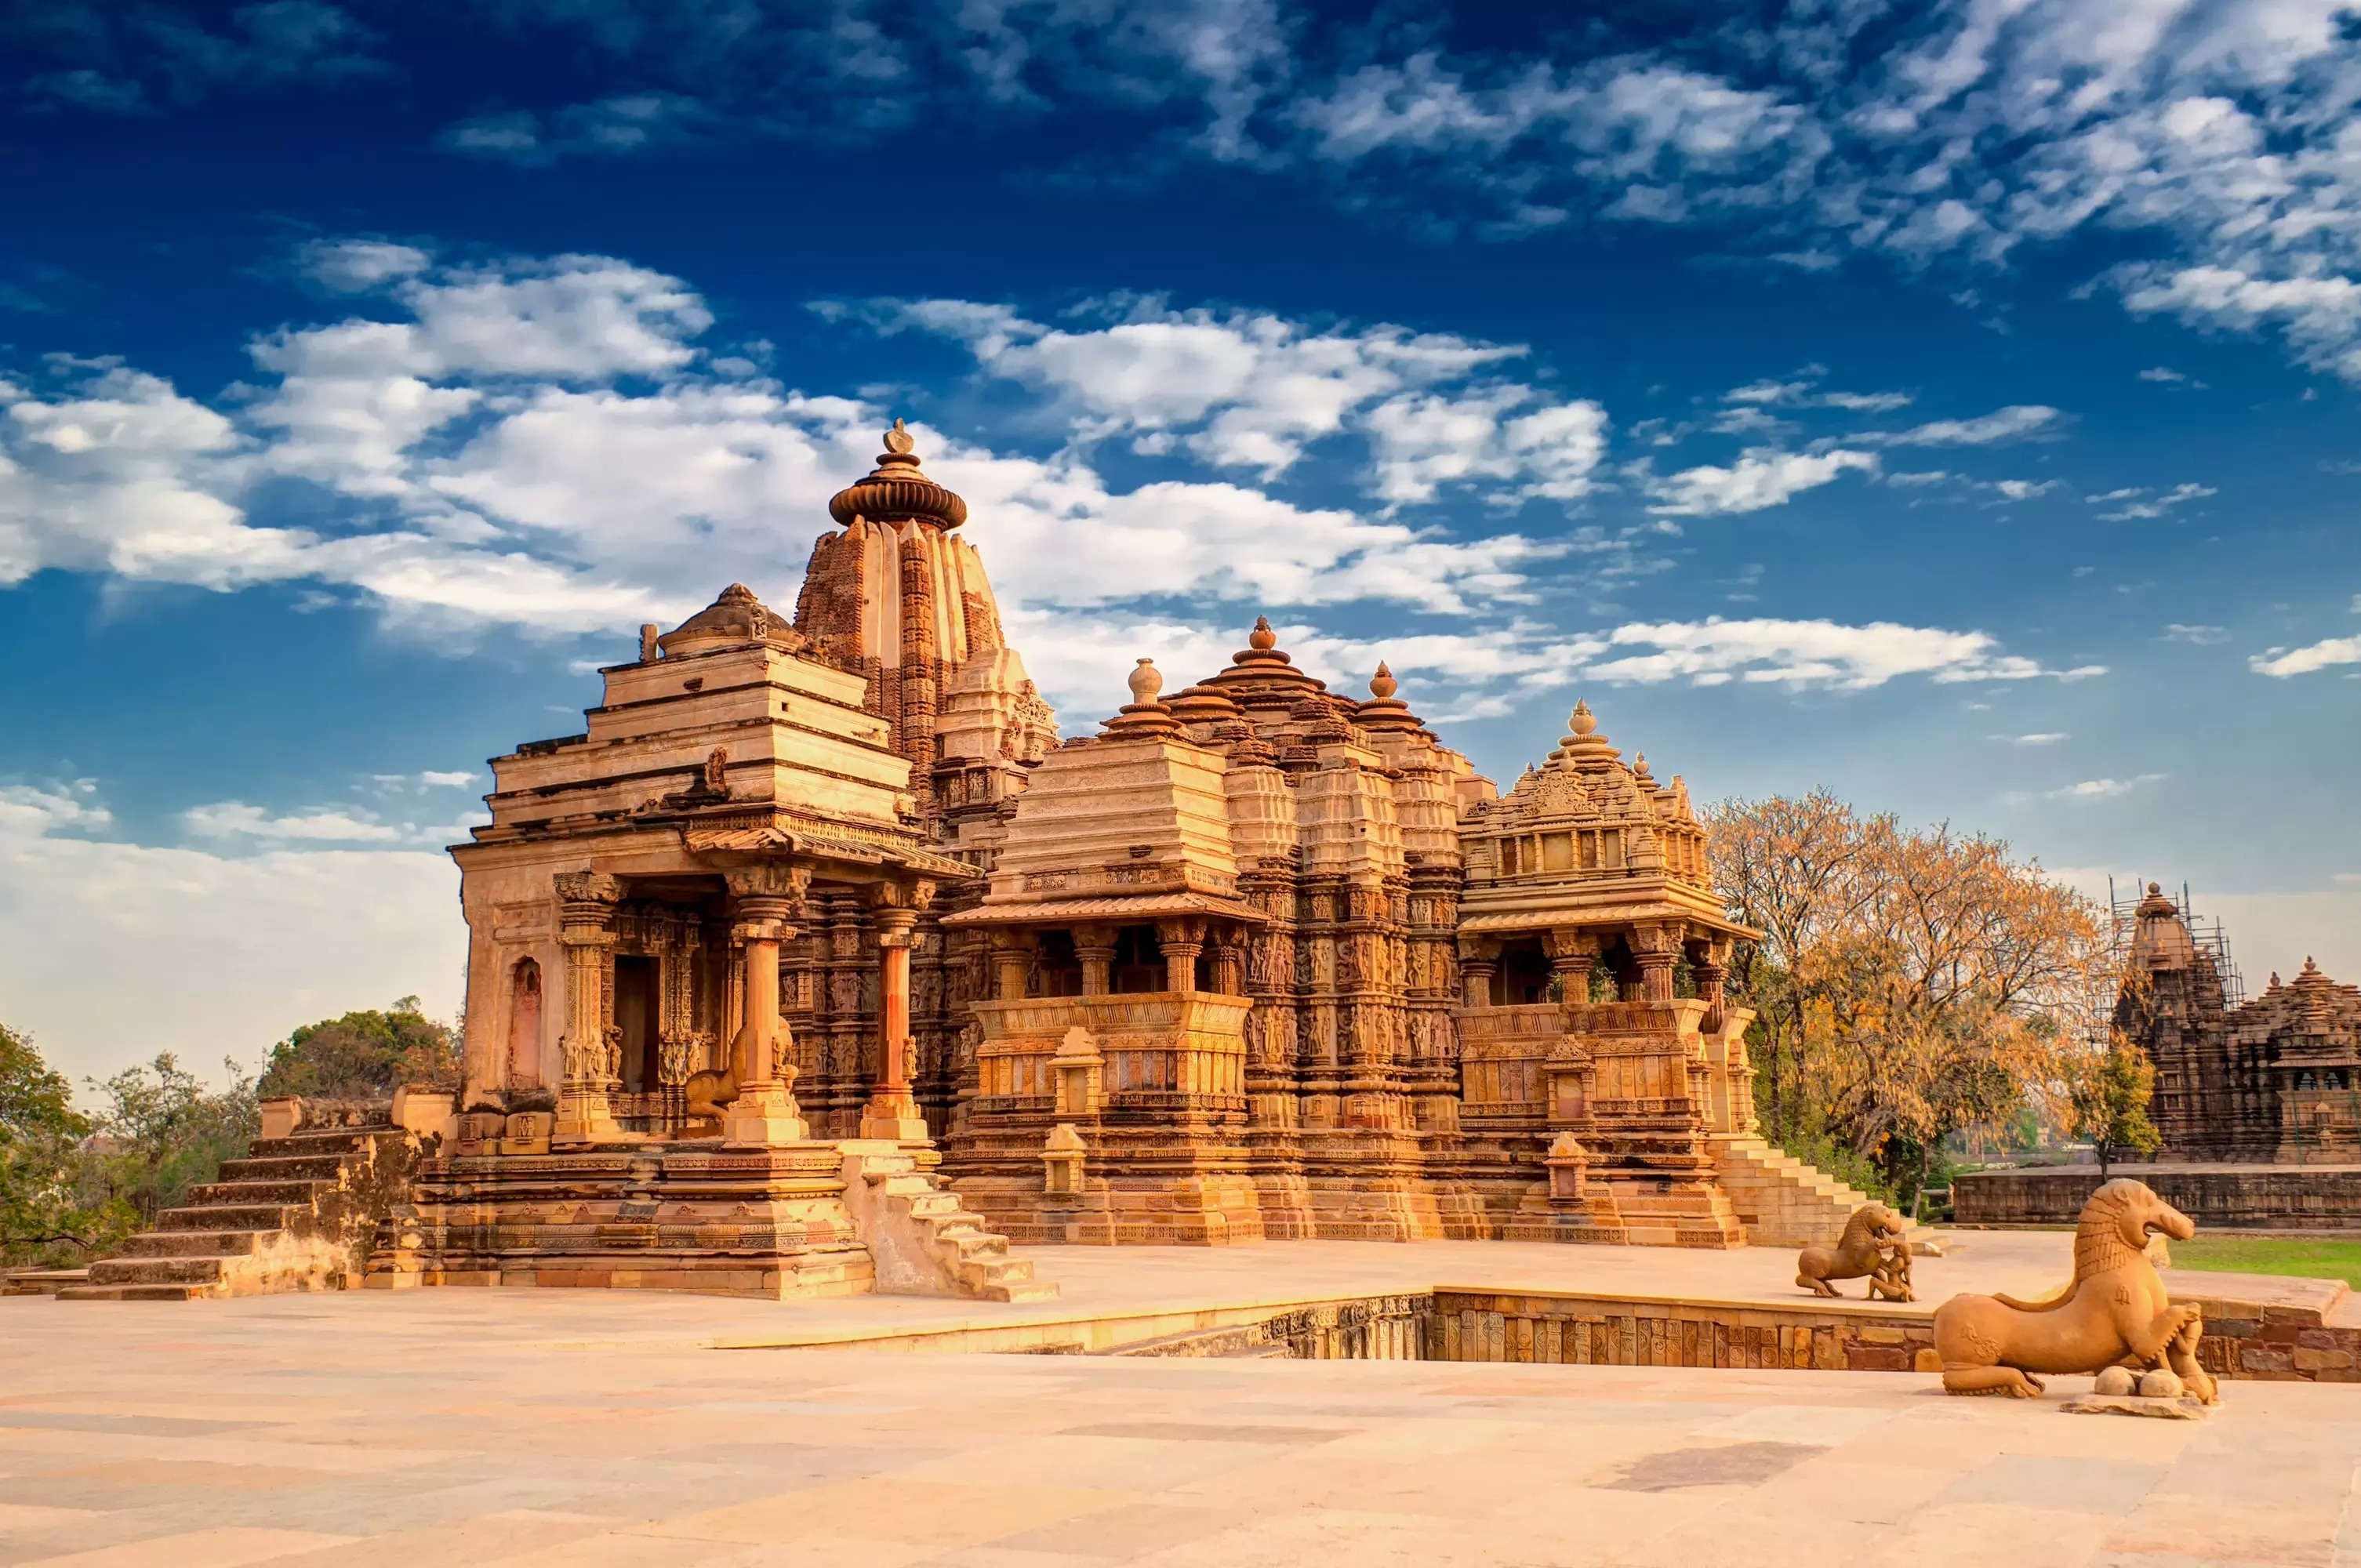 Madhya Pradesh Tourism to host ICRT's Responsible Tourism Awards in September in Bhopal